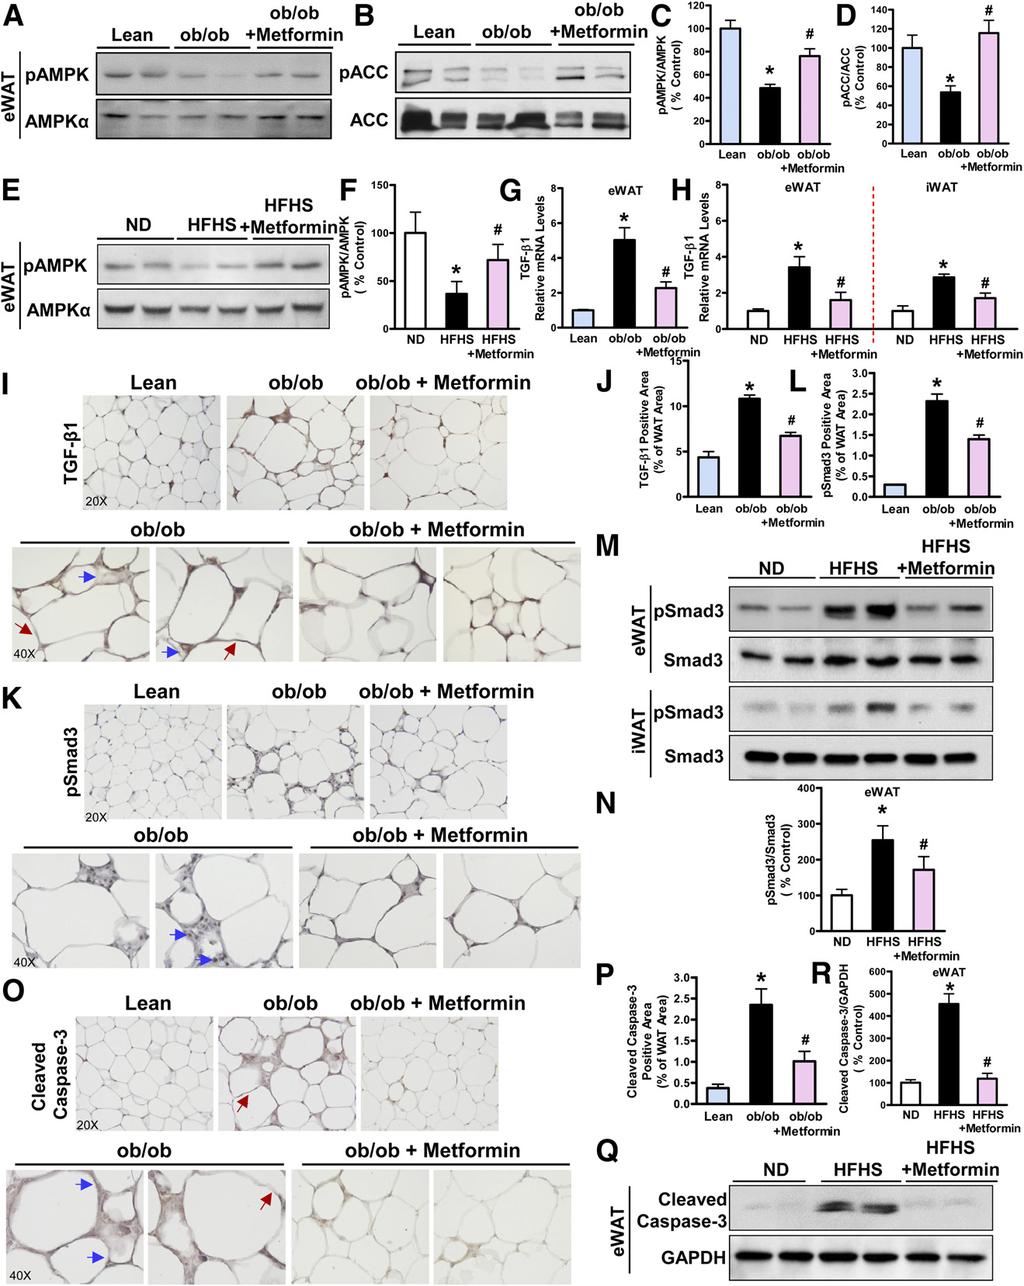 2300 Antifibrotic Role of AMPK in Adipose Tissue Diabetes Volume 65, August 2016 Figure 4 Metformin stimulates AMPK activity and inhibits TGF-b1/Smad3 signaling in WAT of obese mice.